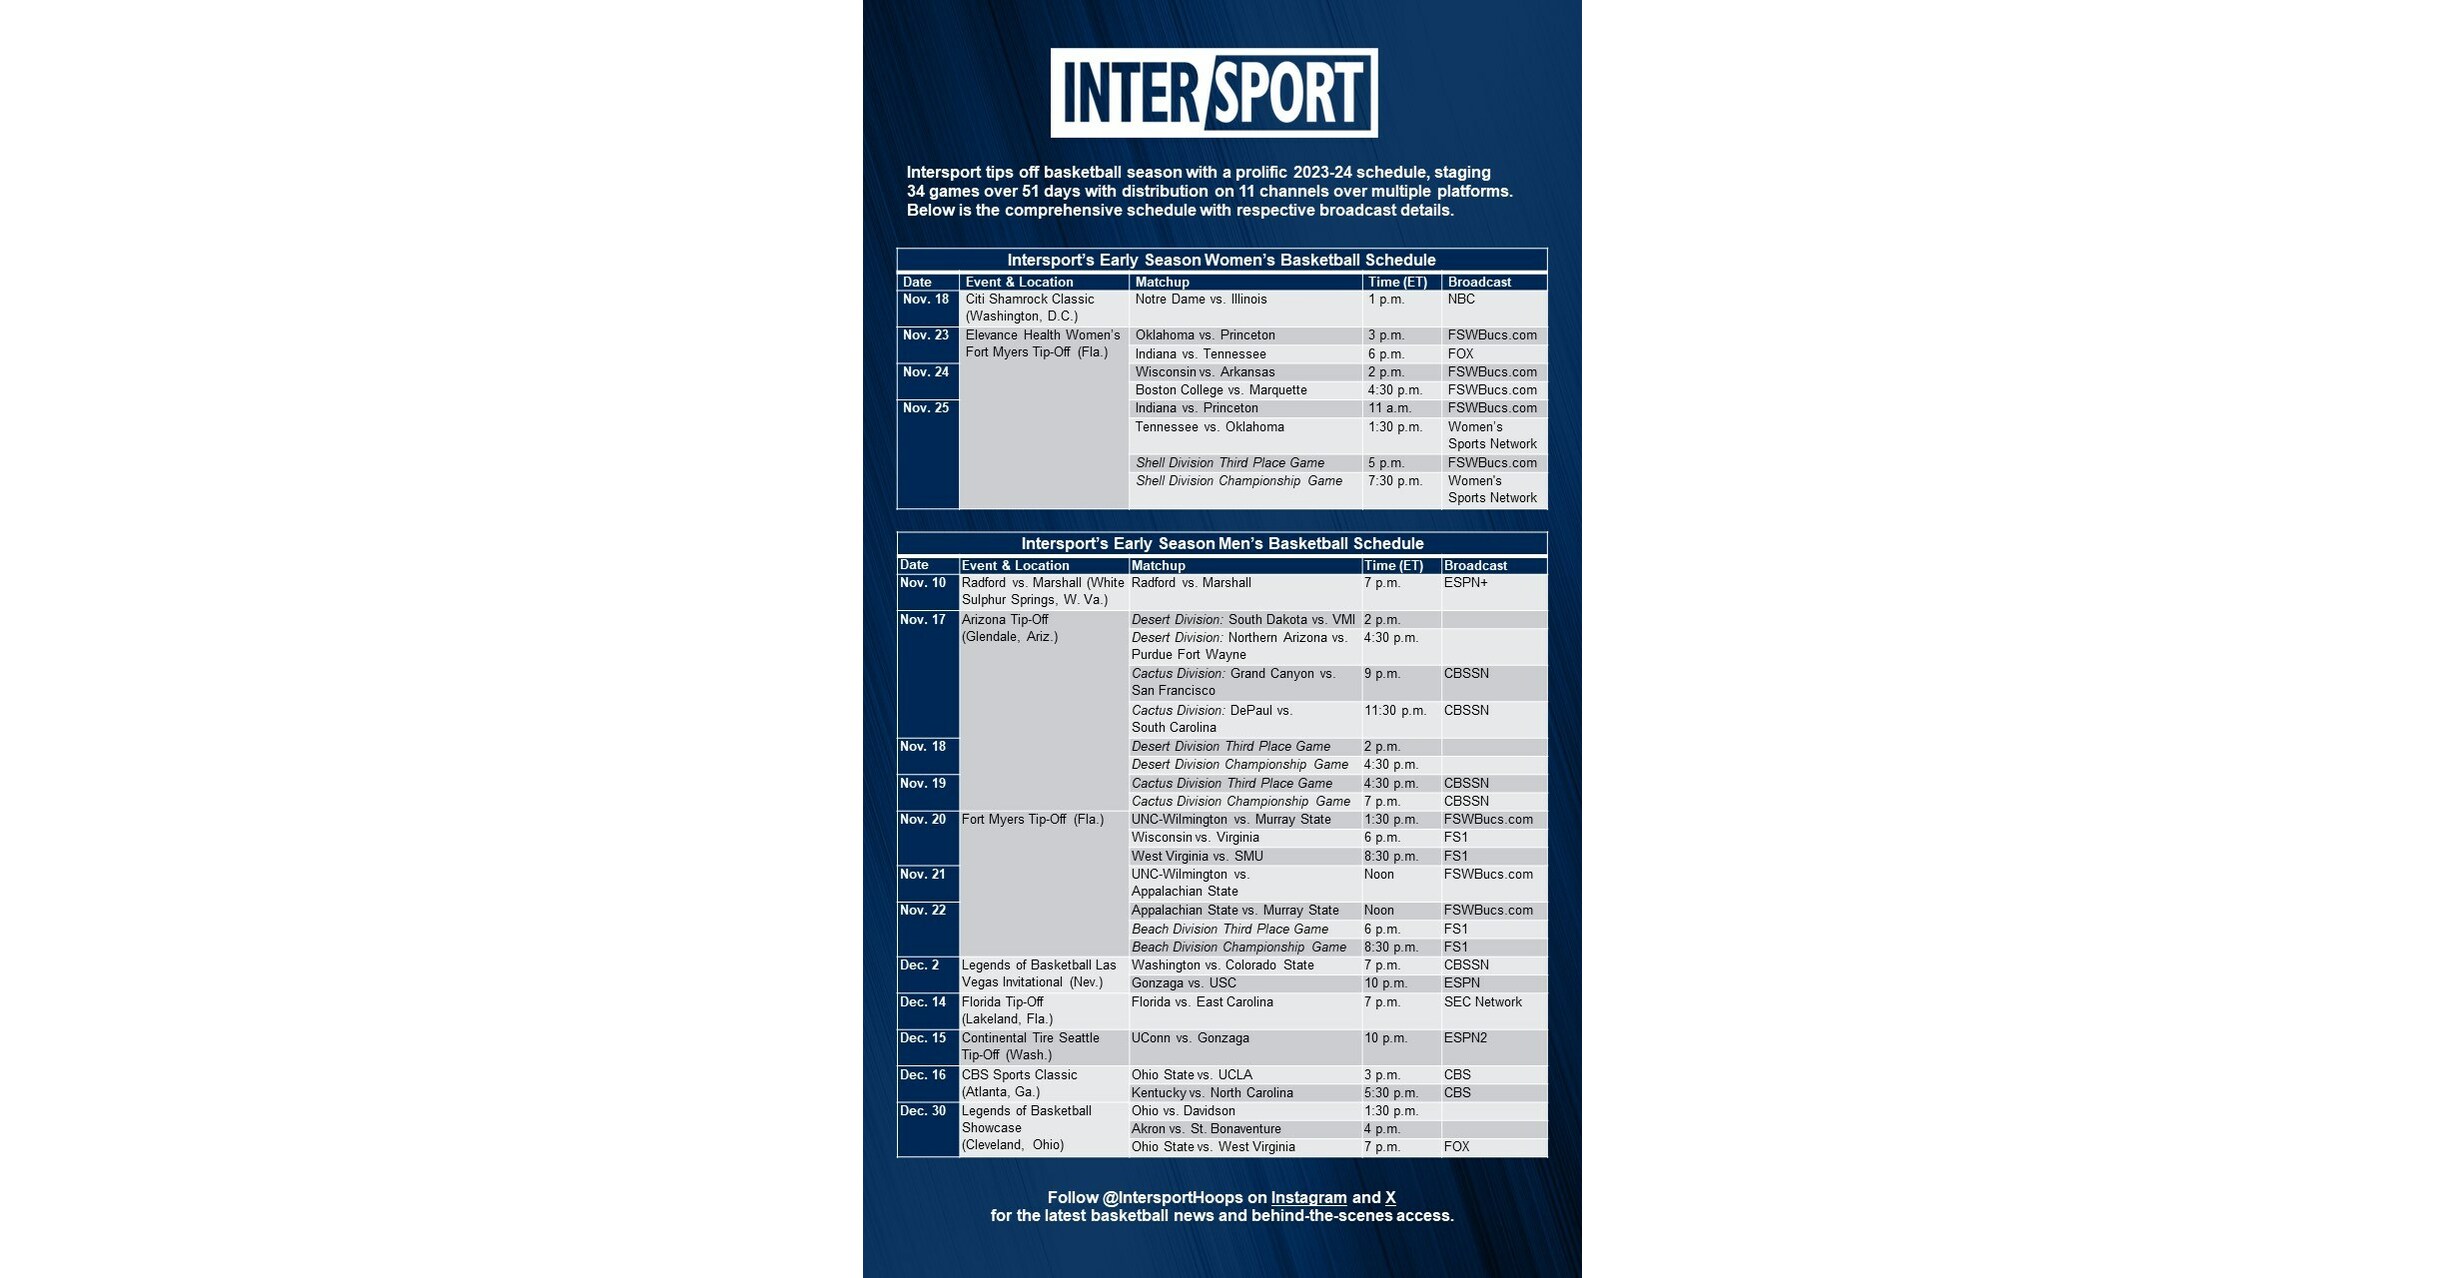 Intersport Tips Off Basketball Season with Prolific 2023-24 Schedule